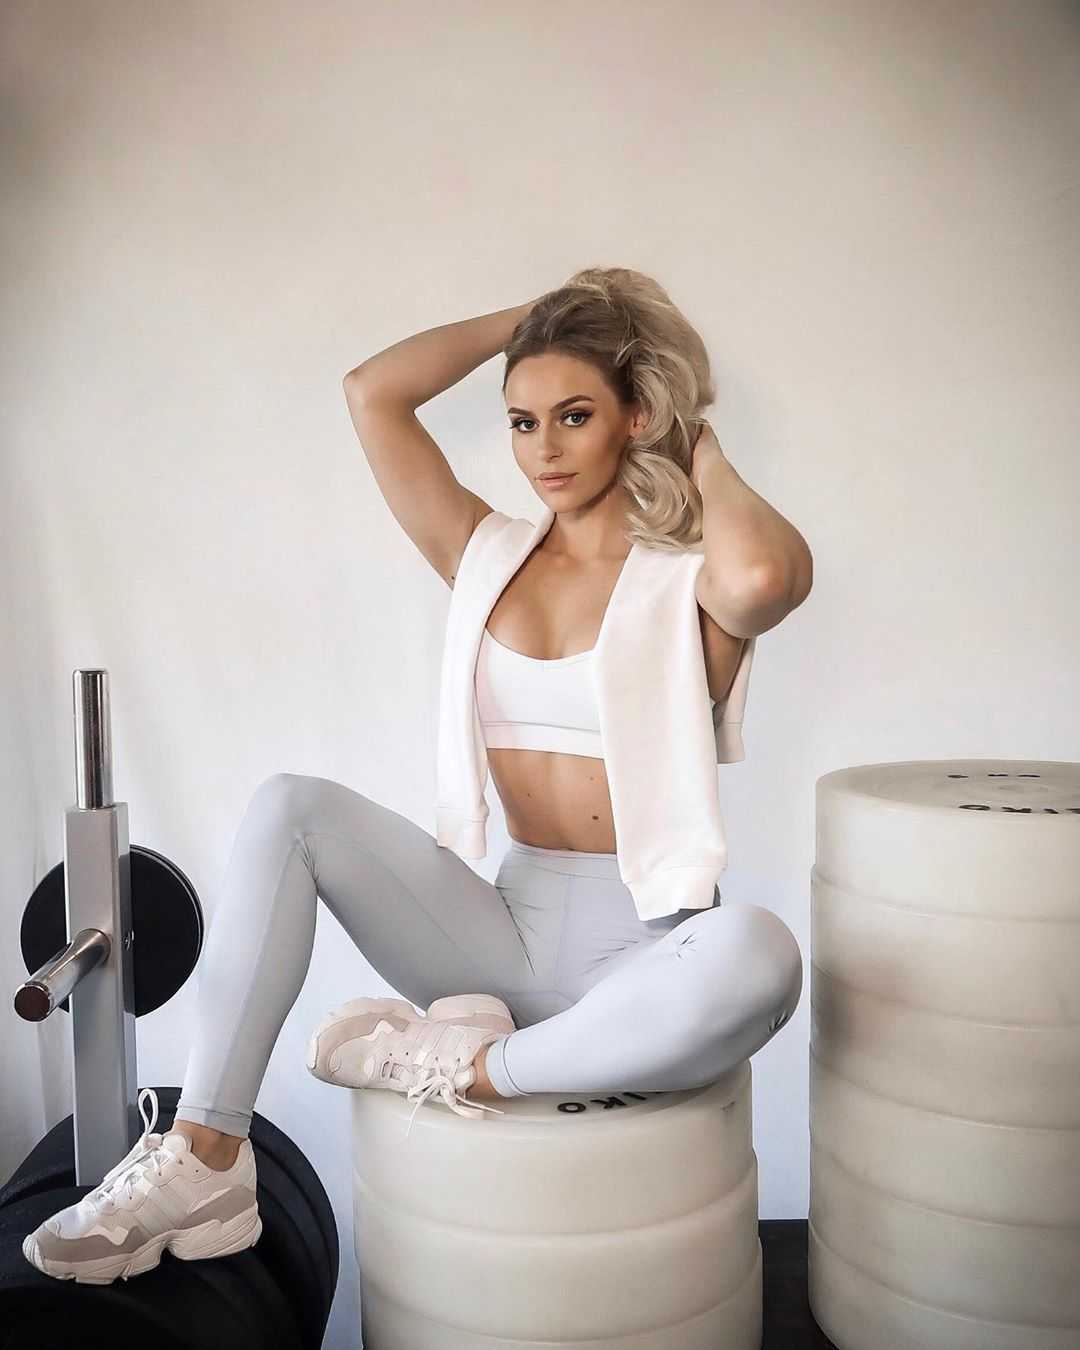 75+ Hot Pictures Of Anna Nystrom Which Expose Her Sexy Body | Best Of Comic Books